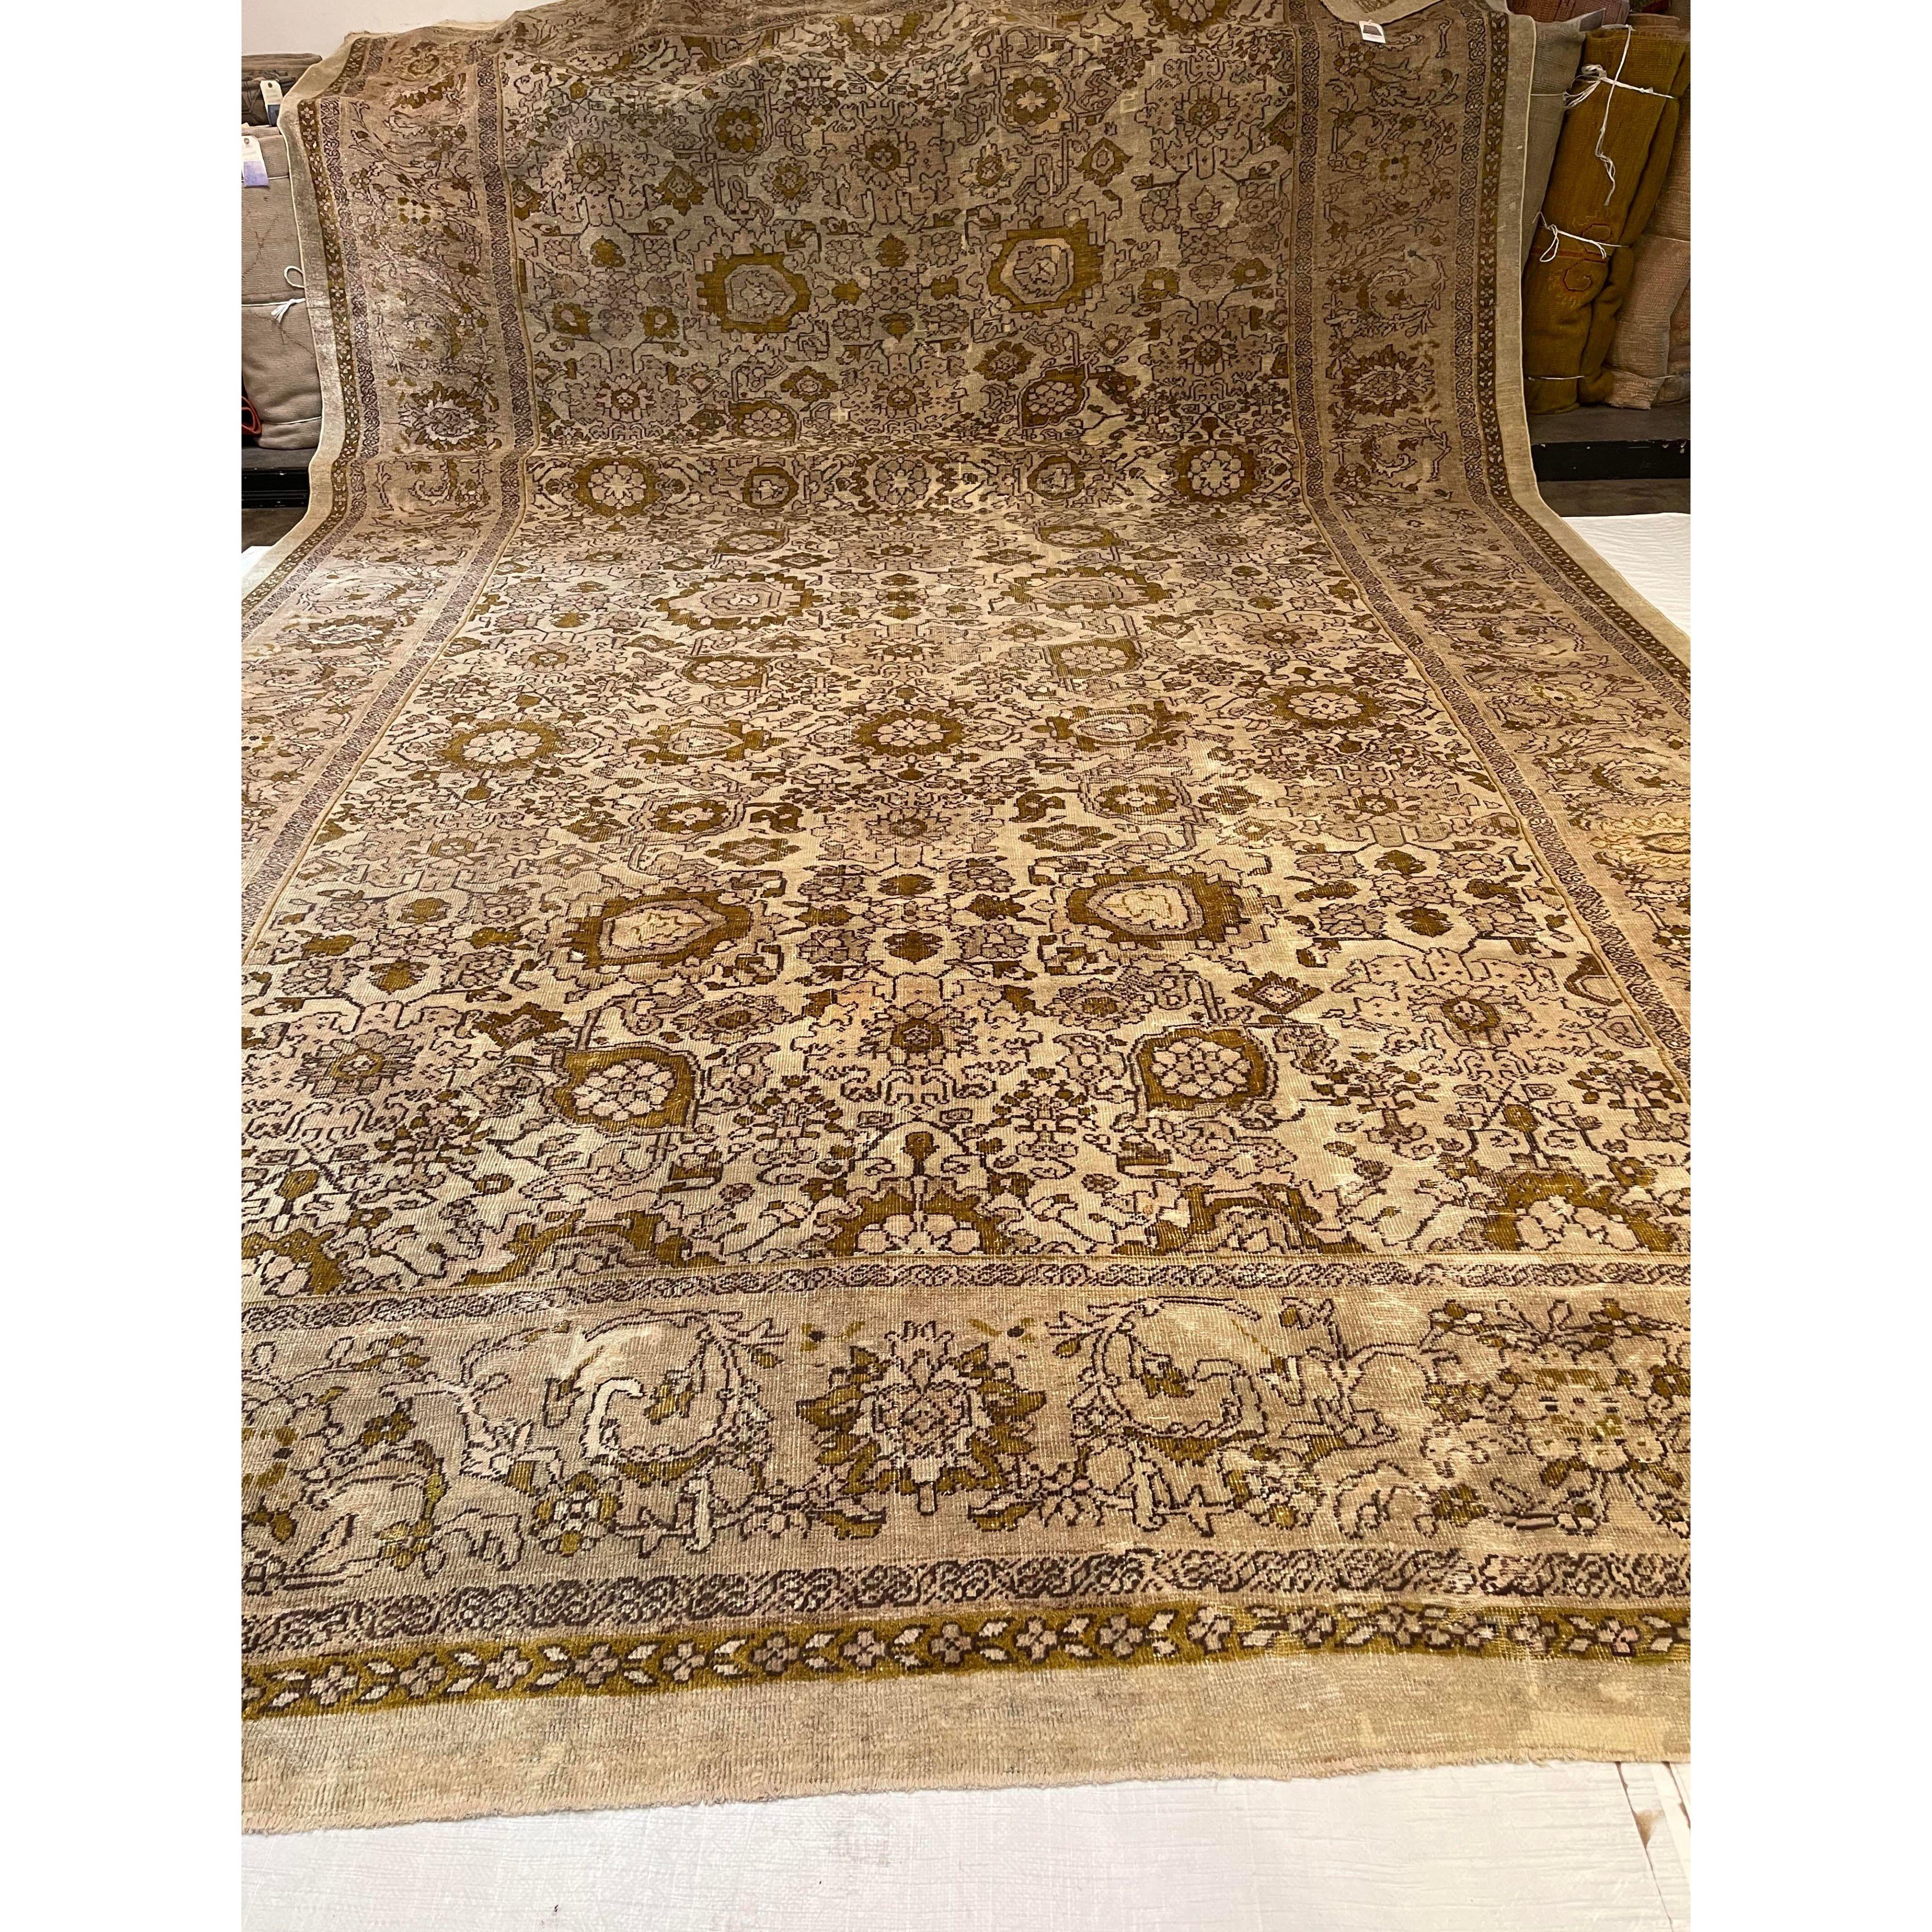 Early 20th Century Antique Sultanbad Rug In Good Condition For Sale In Los Angeles, US